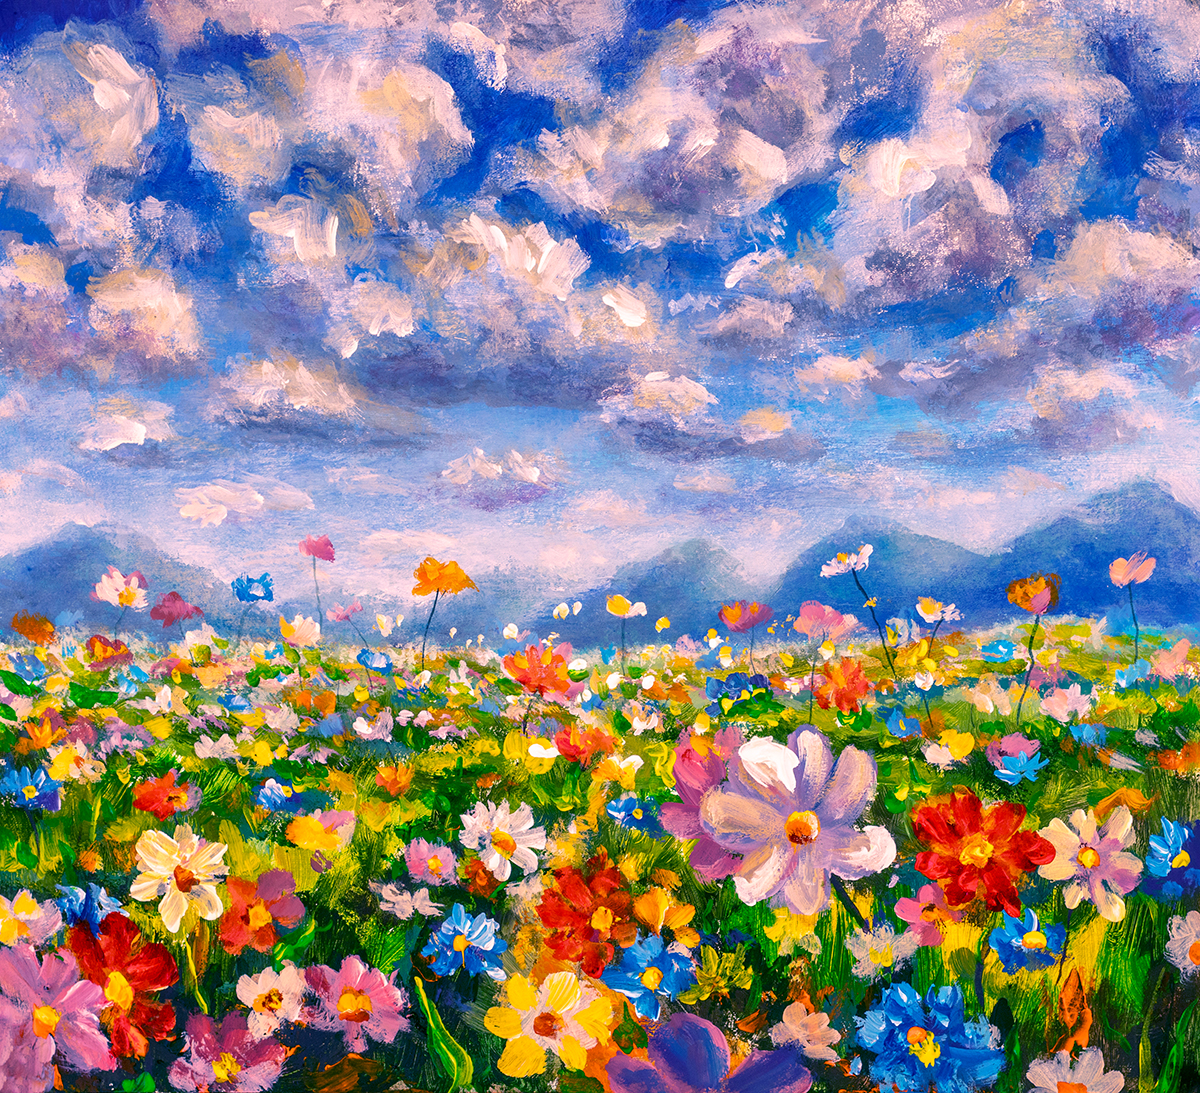 A painting of a field of flowers